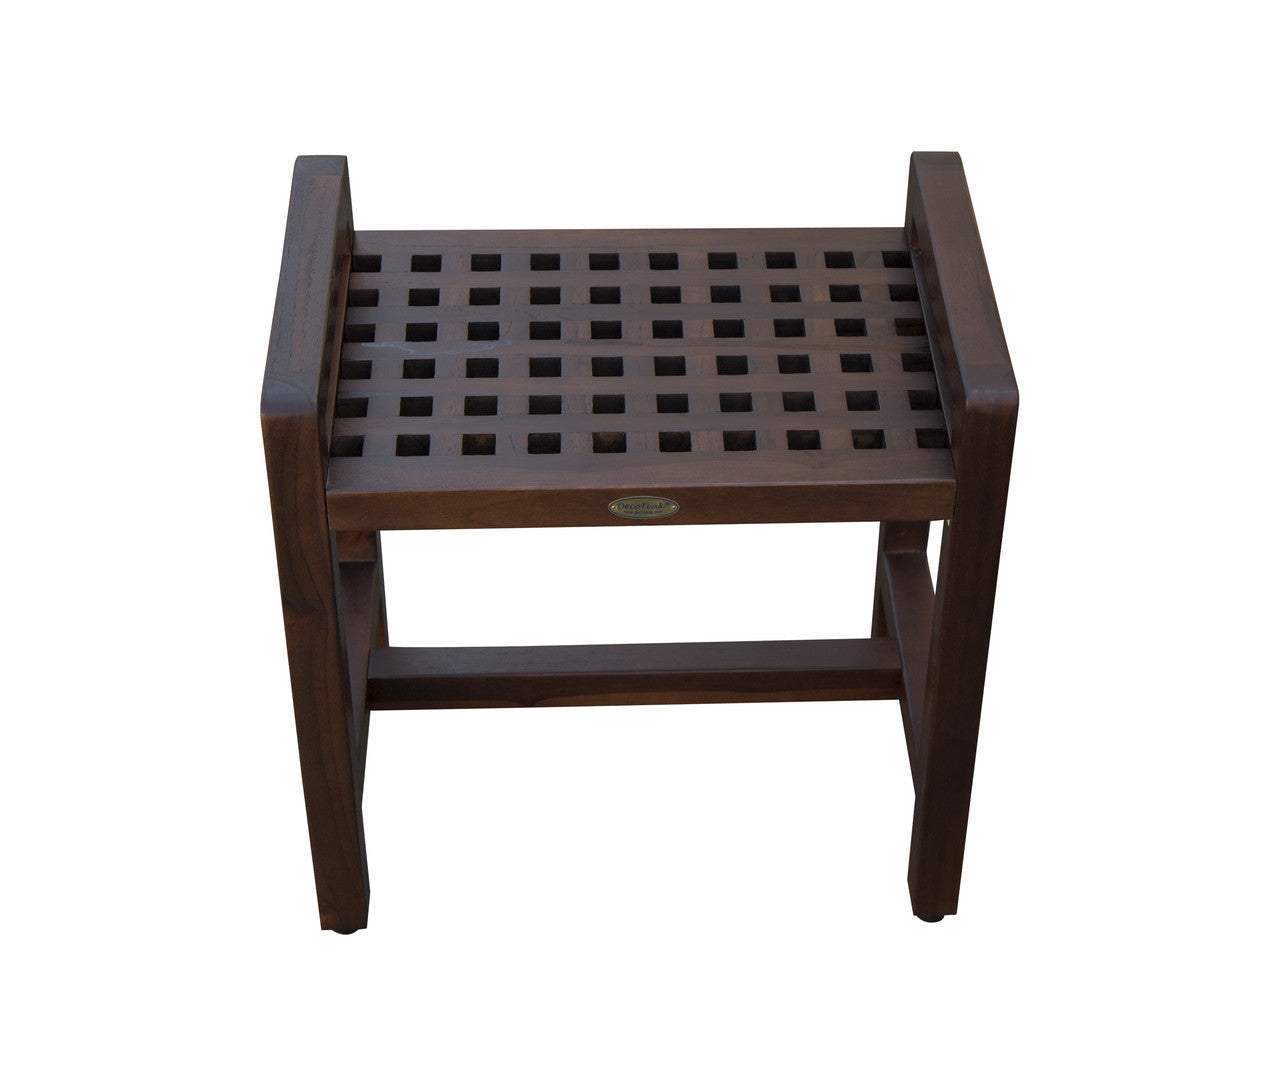 DecoTeak Espalier 20" Teak Wood Shower Bench with LiftAide Arms in Woodland Brown Finish